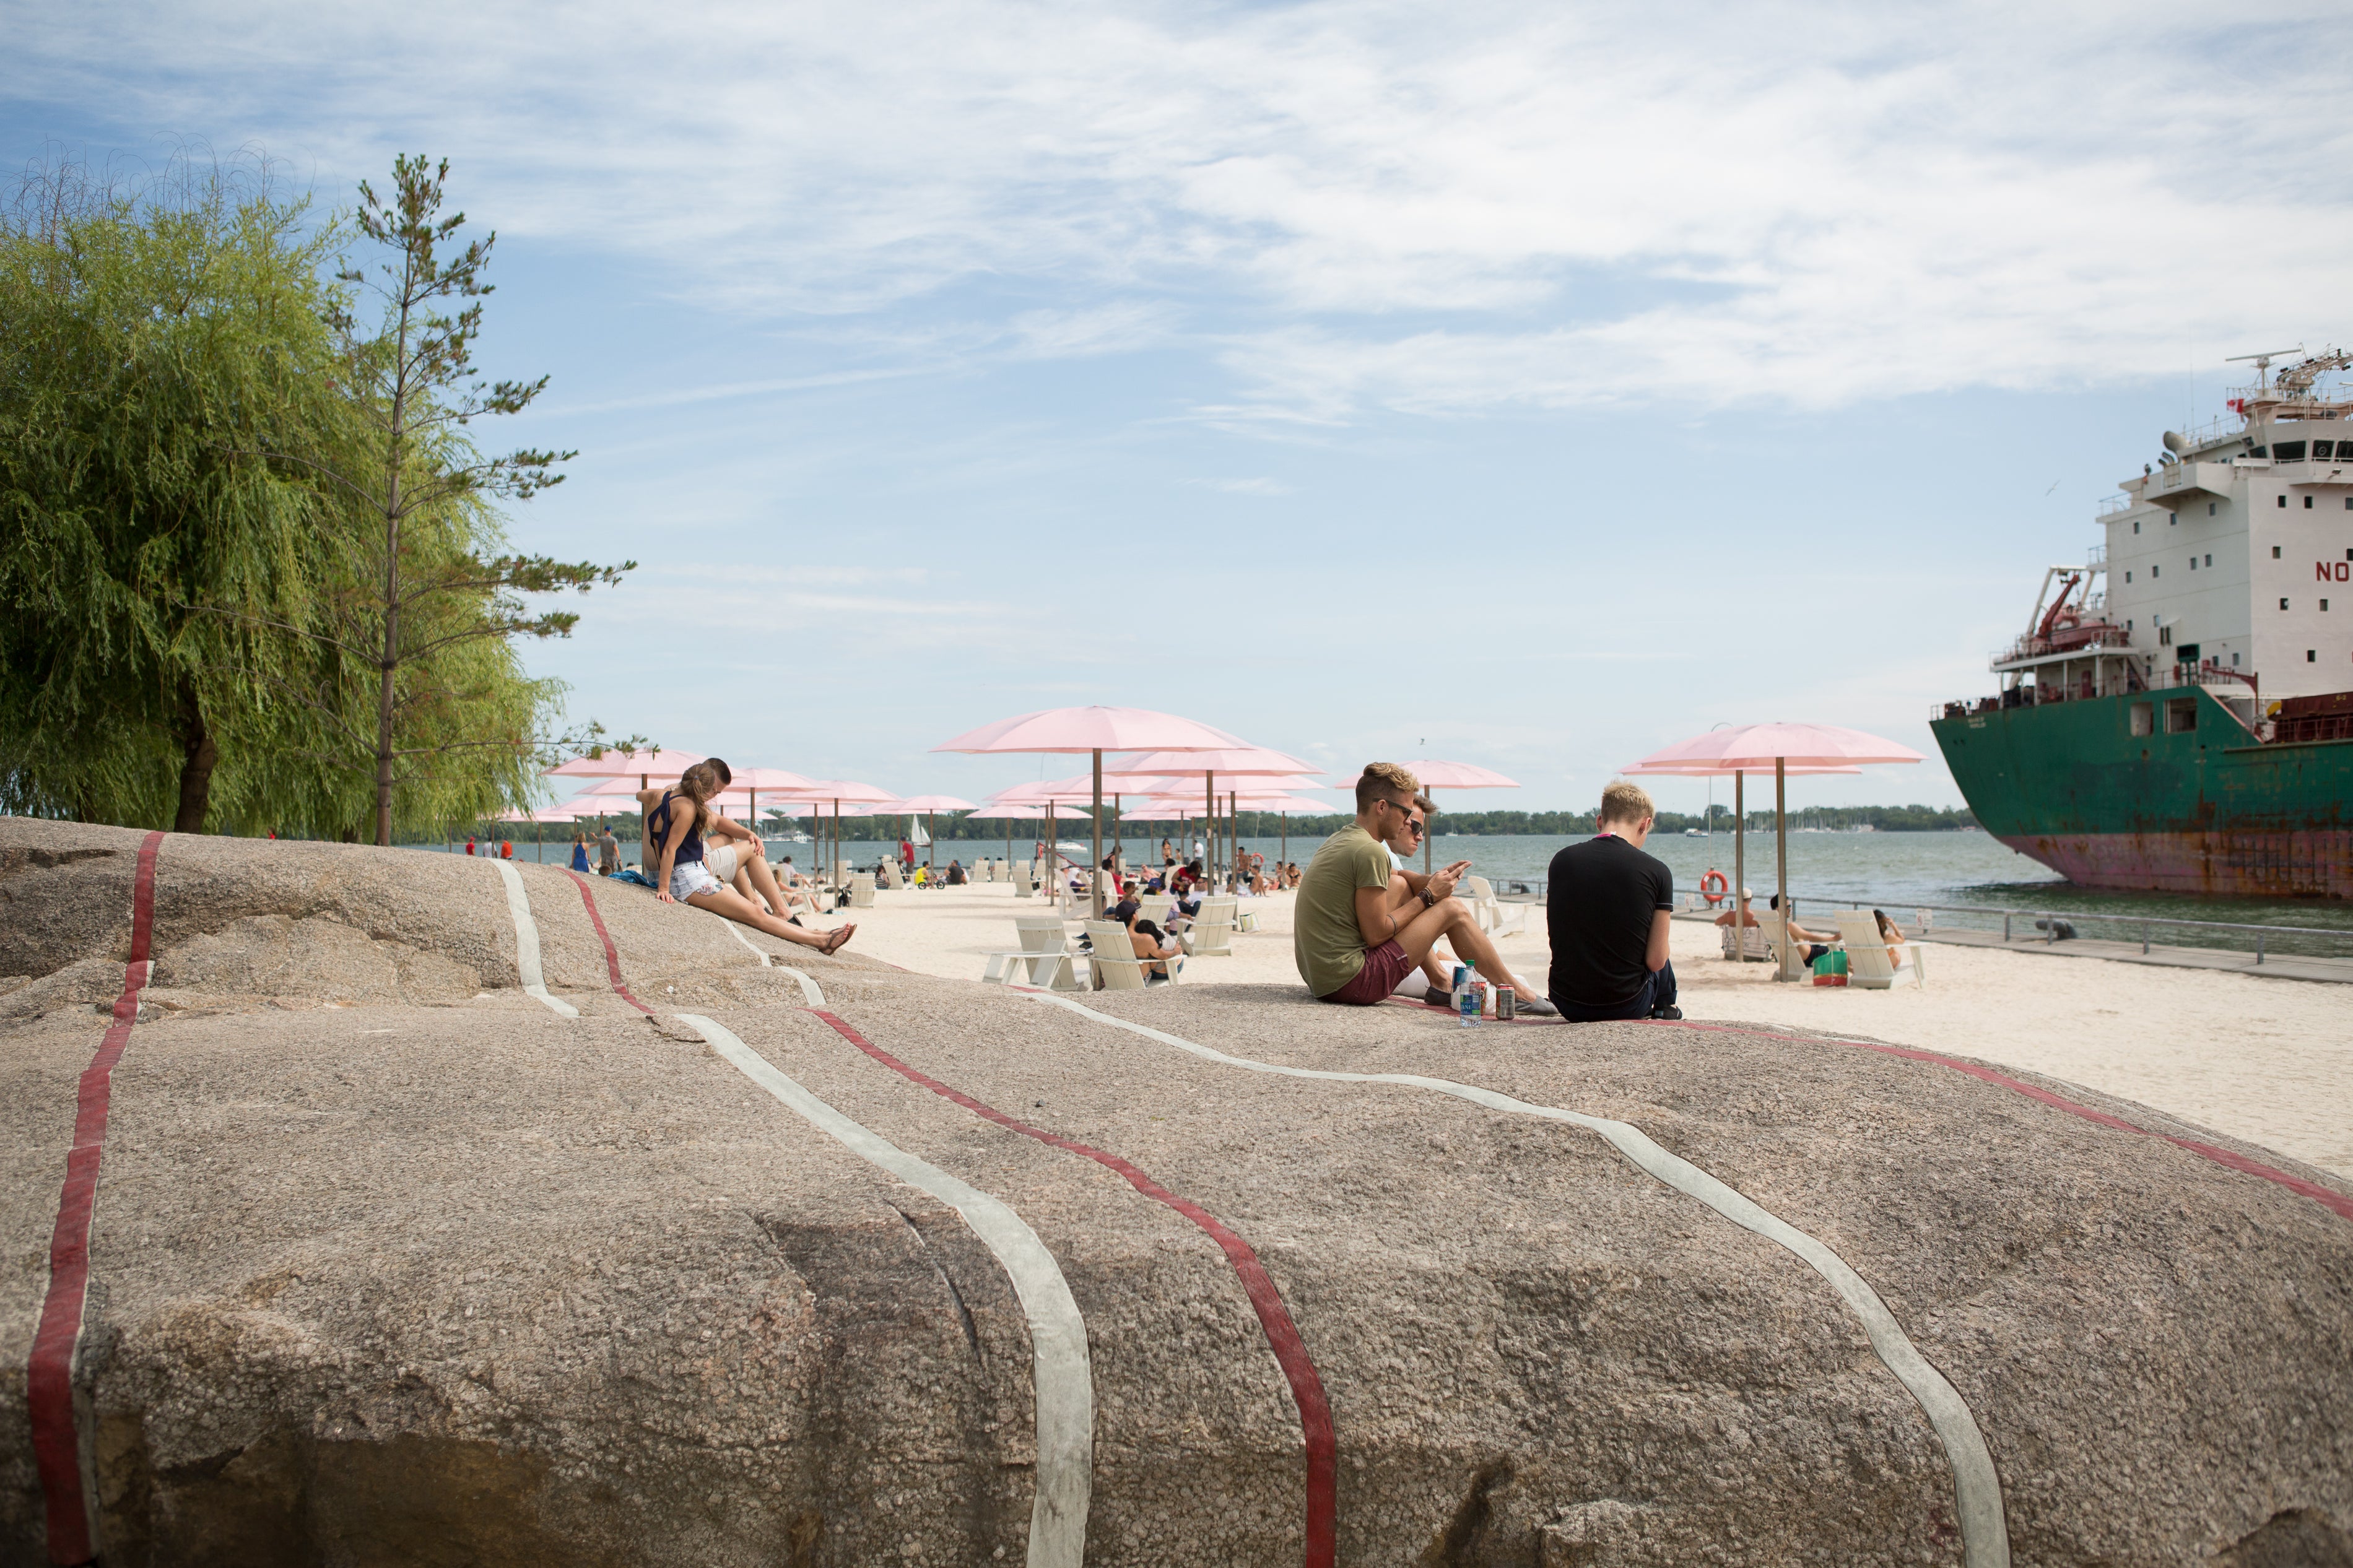 Giant candy striped rocks at Sugar Beach are a perfect resting place.